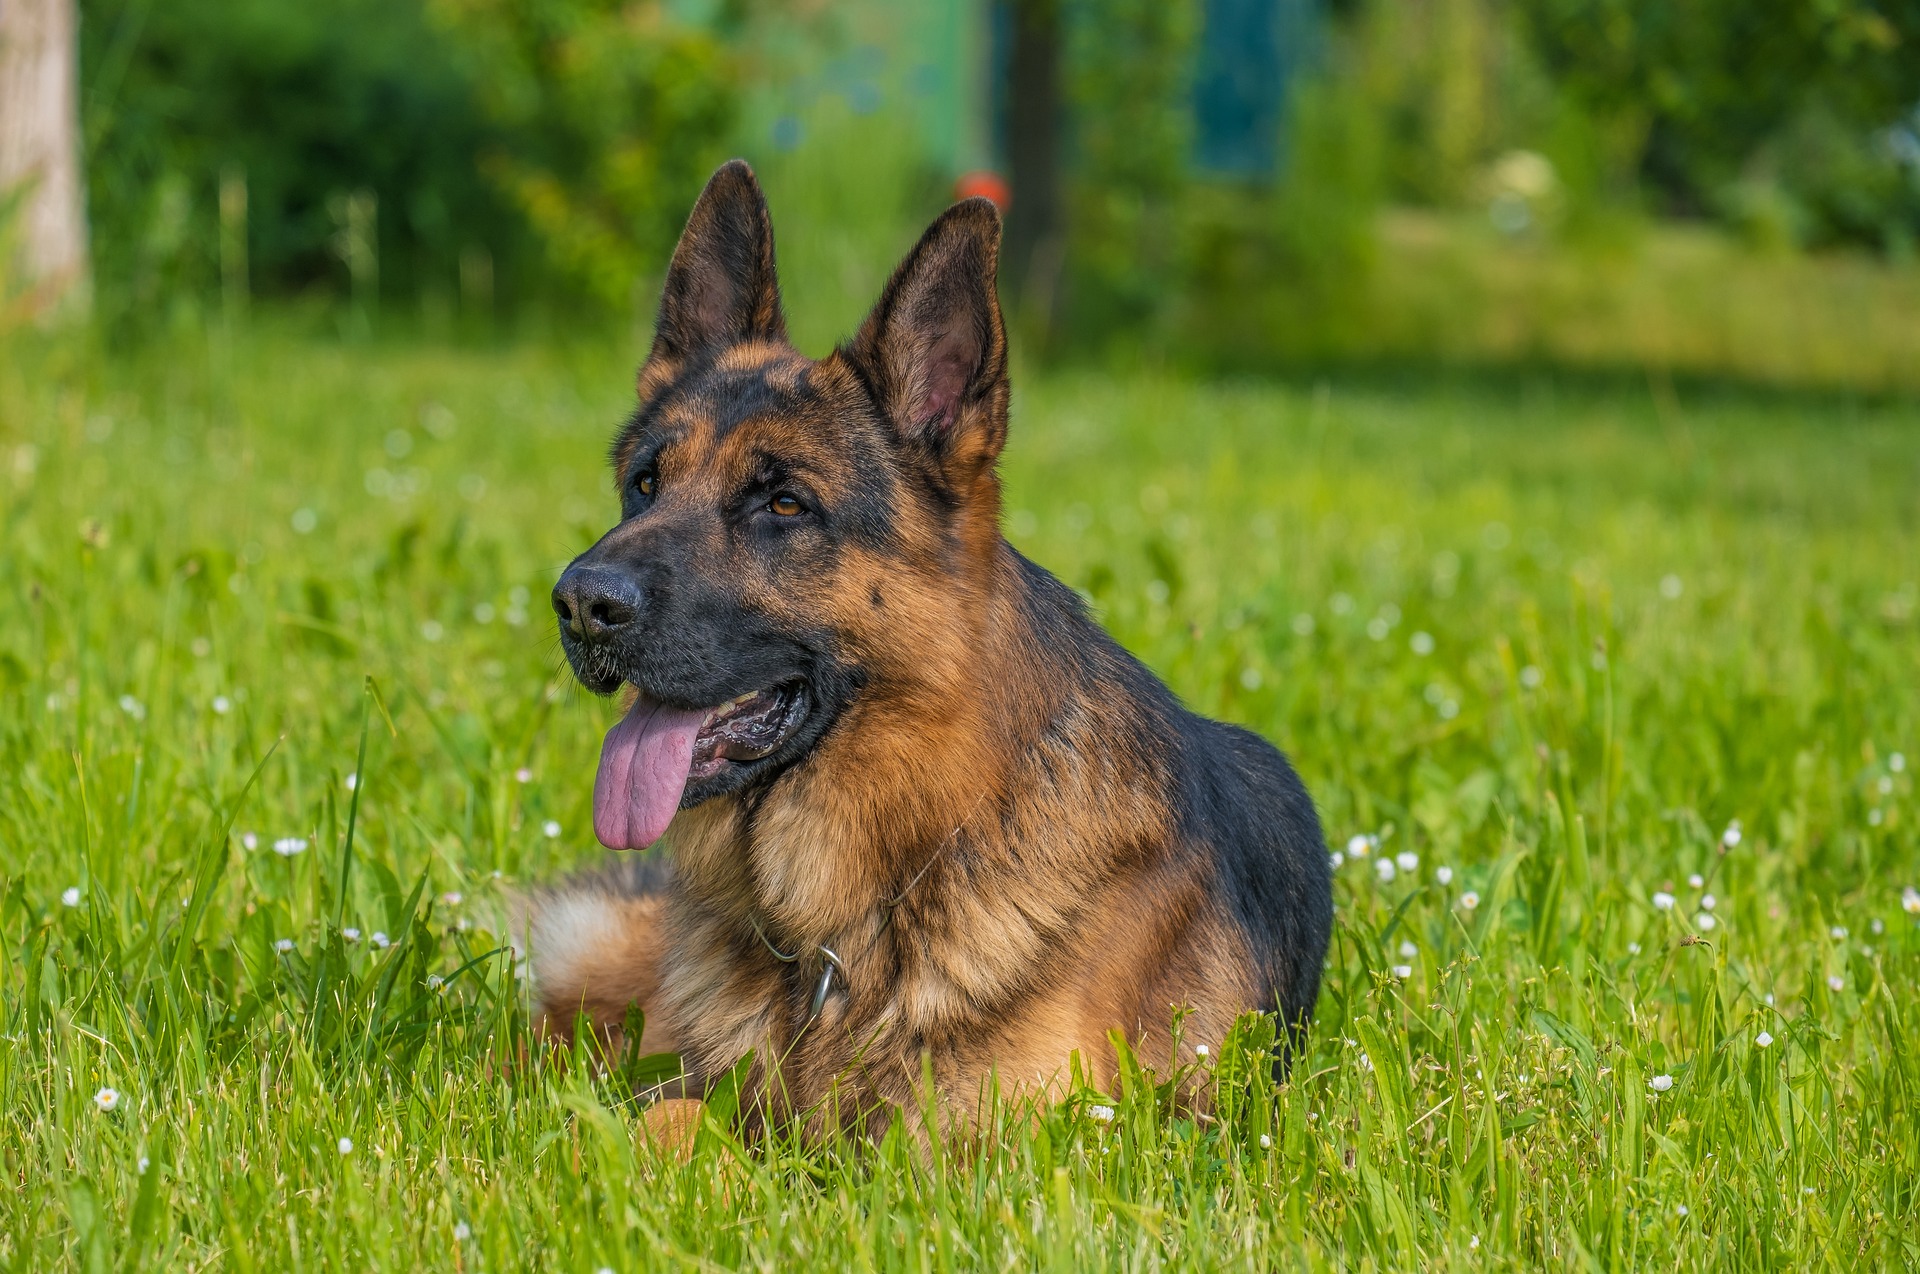 GSD Vs Border Collie: Comparing Traits And Temperaments Of Working Dogs